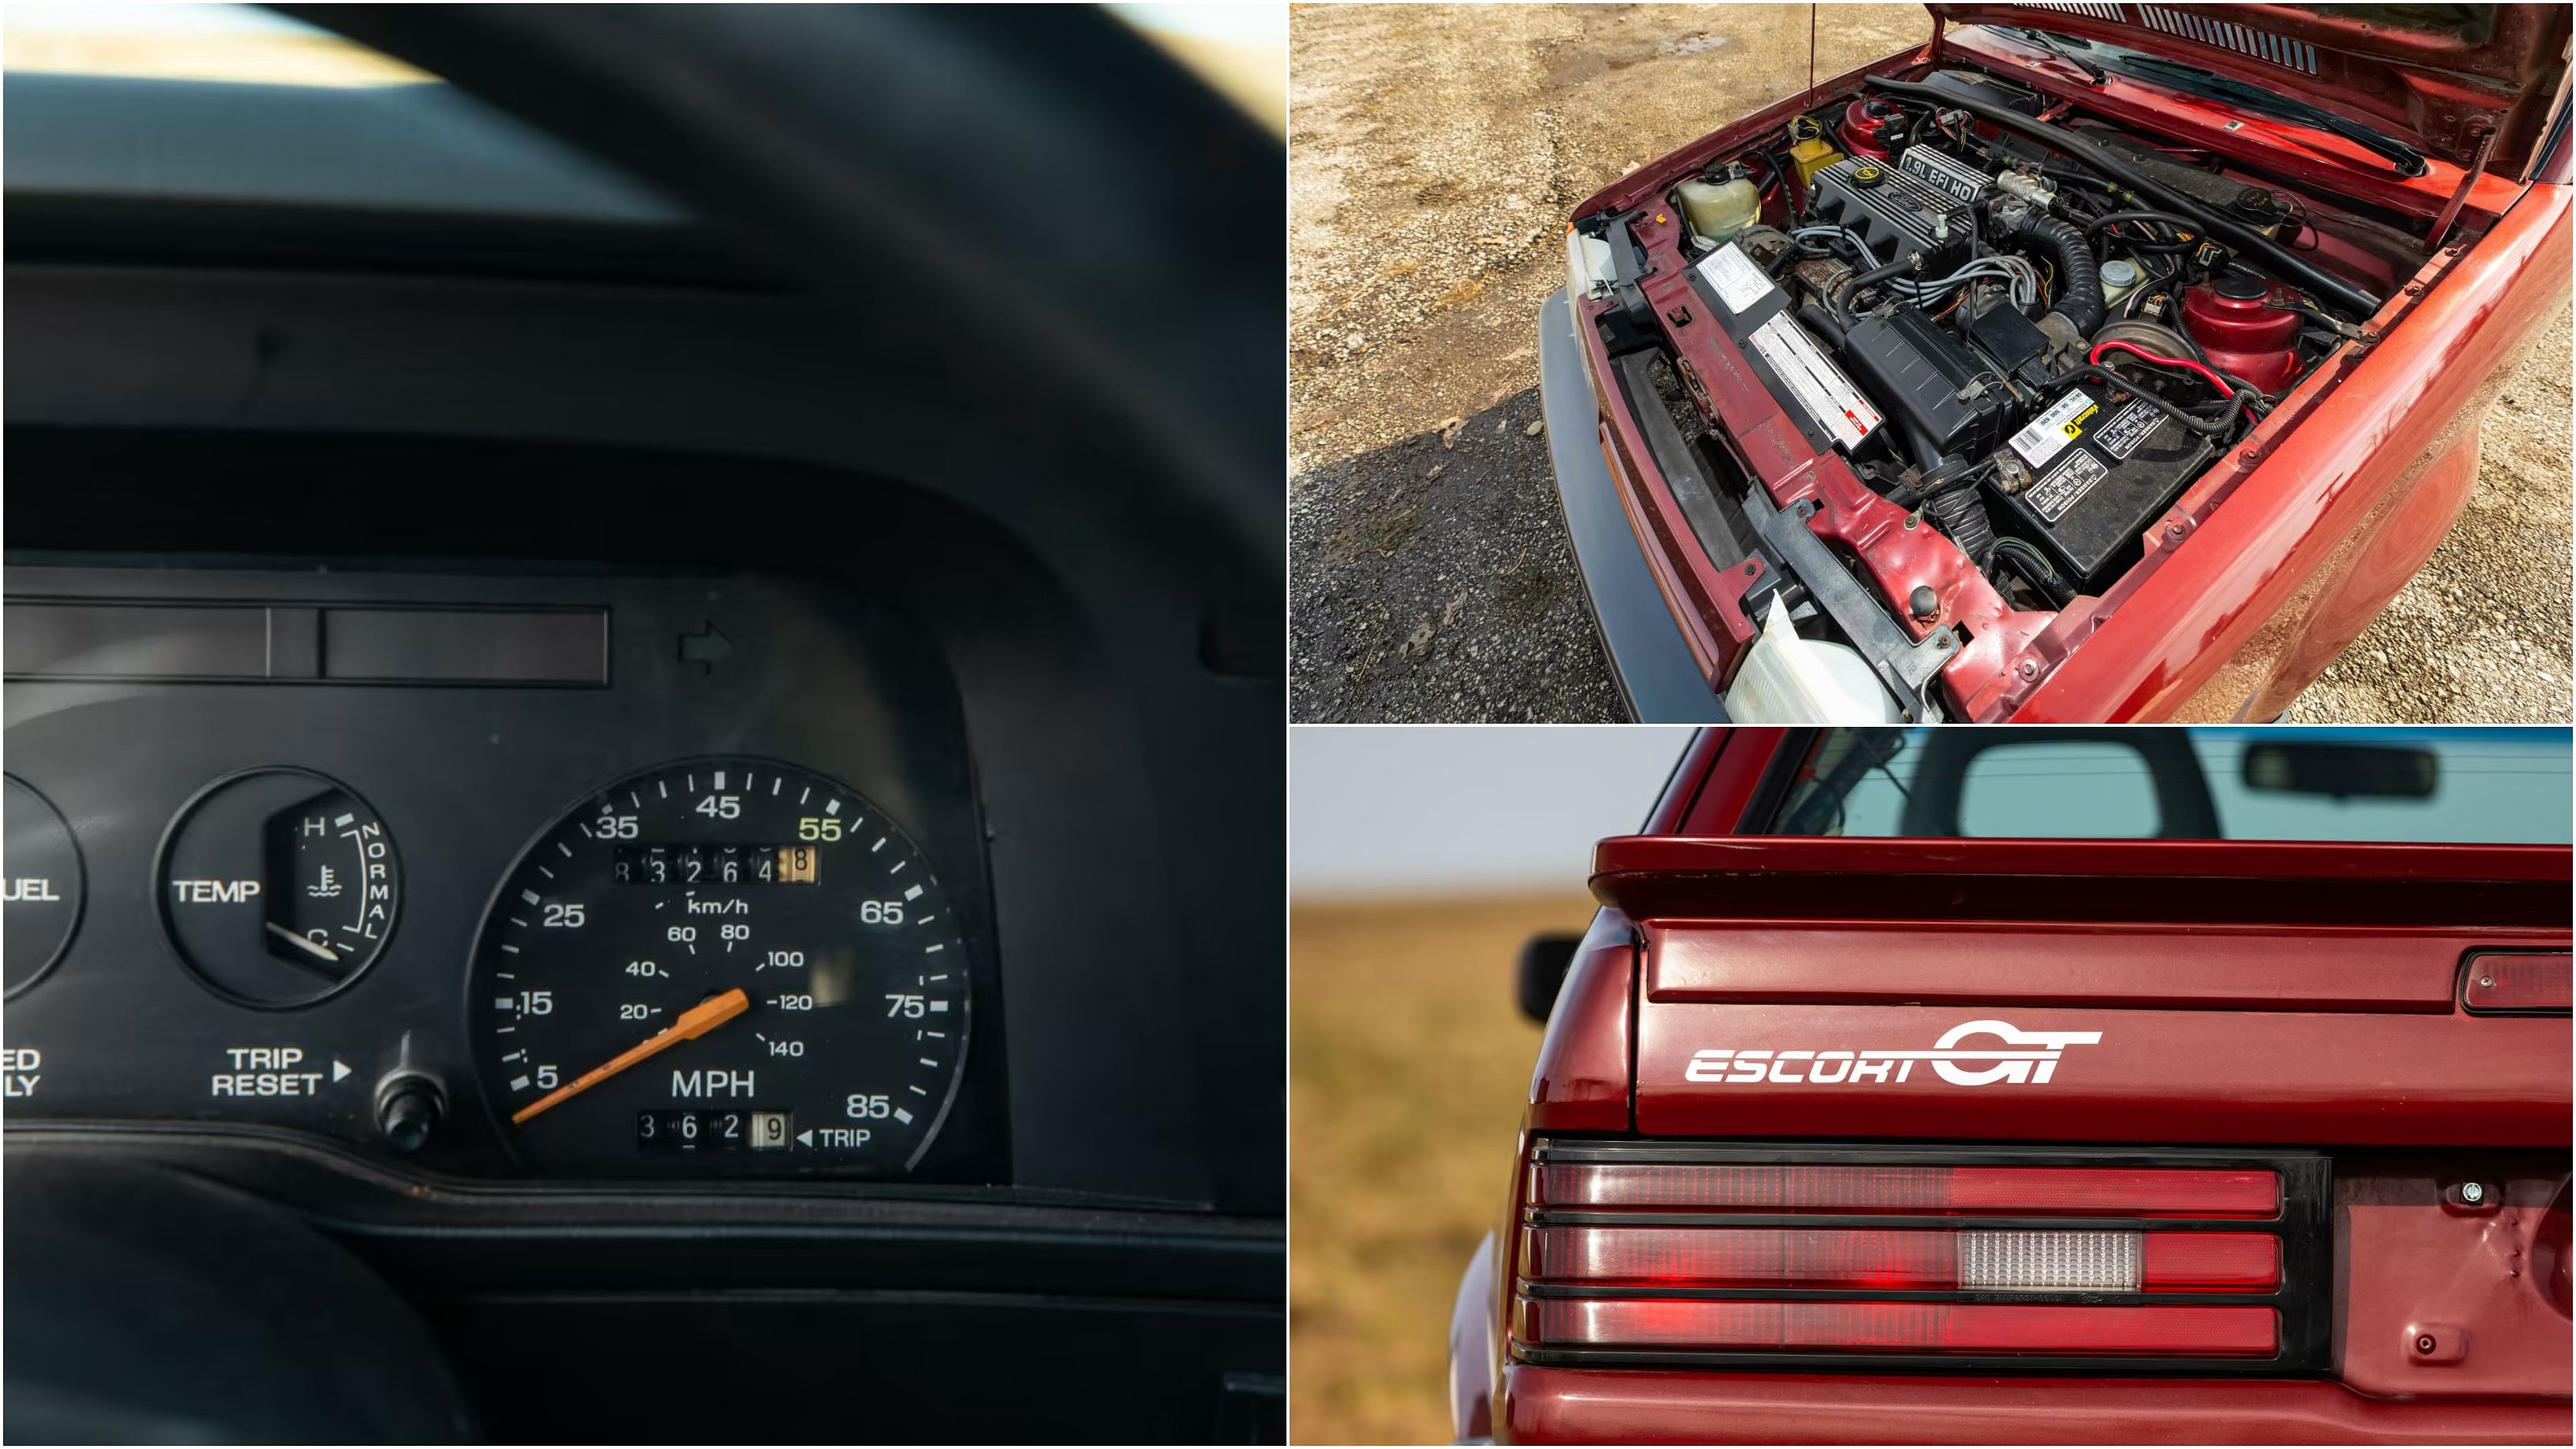 1989 Ford Escort GT speedometer, engine, and "Escort GT" tag